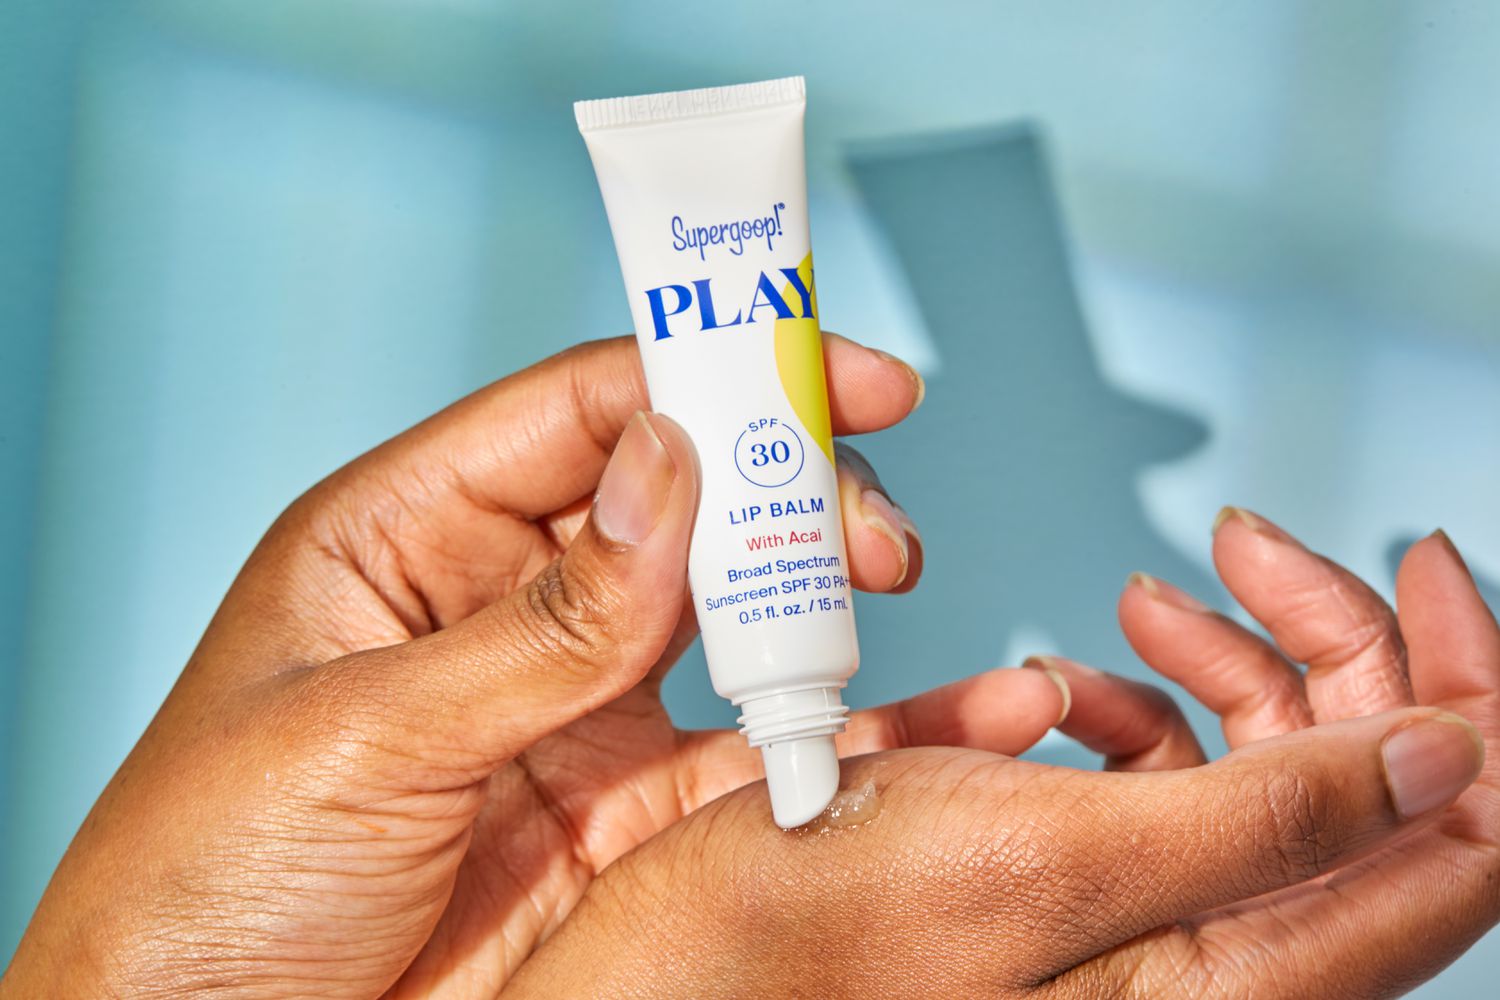 Person's hand squeezing Supergoop! PLAY Lip Balm SPF 30 on their hands